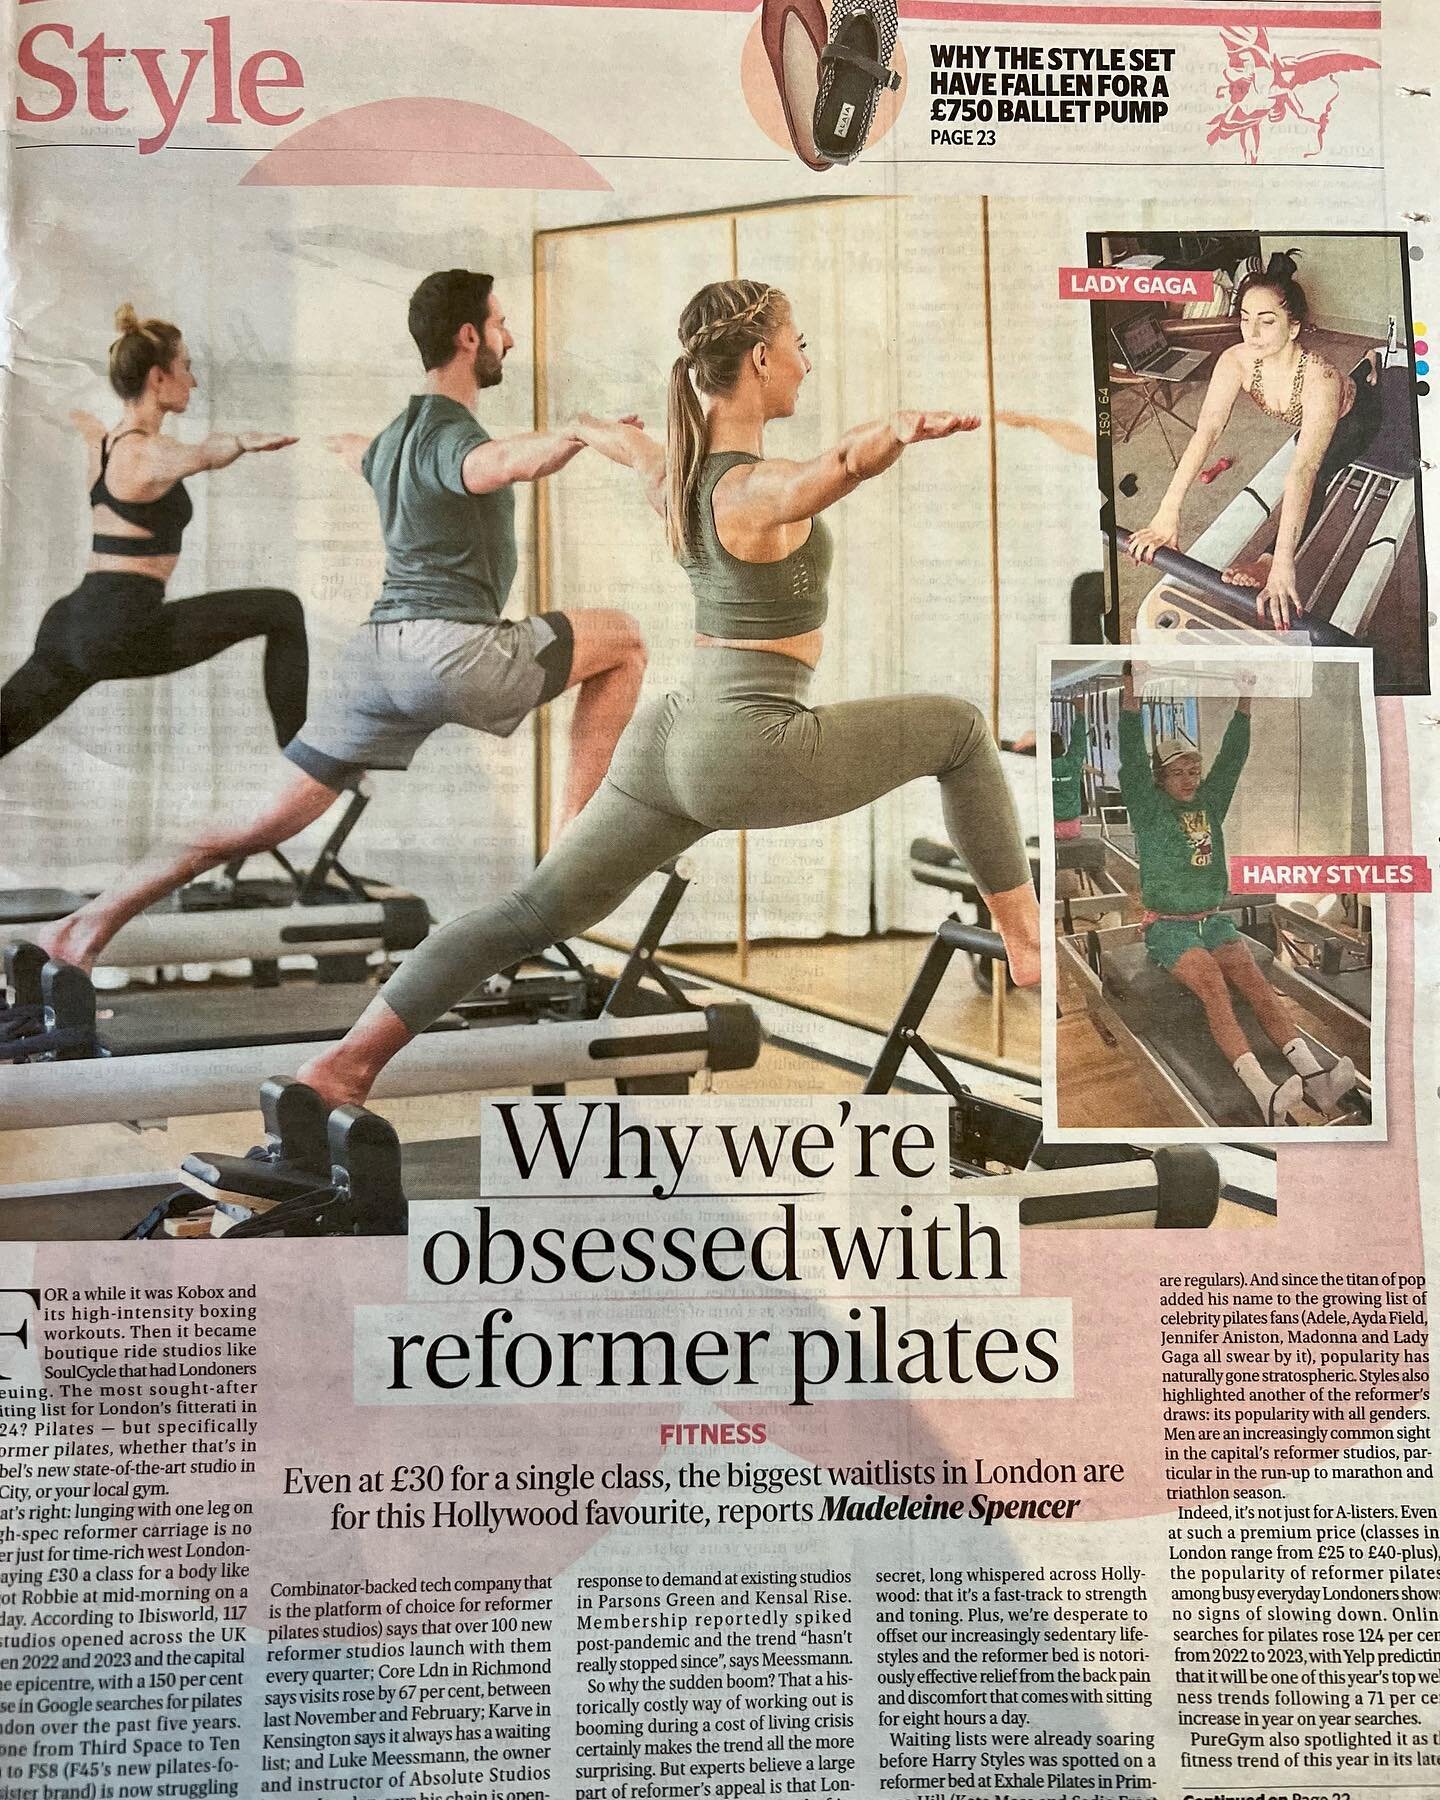 Top of the Top 5!!! 🙌🏻🙌🏻🙌🏻
.
What a way to cap off an epic week in Absolute land. Our newest studio on Lonsdale Rd in Queens Park is officially a week old and we just happened to appear in the style section of yesterdays @evening.standard 👌
.
